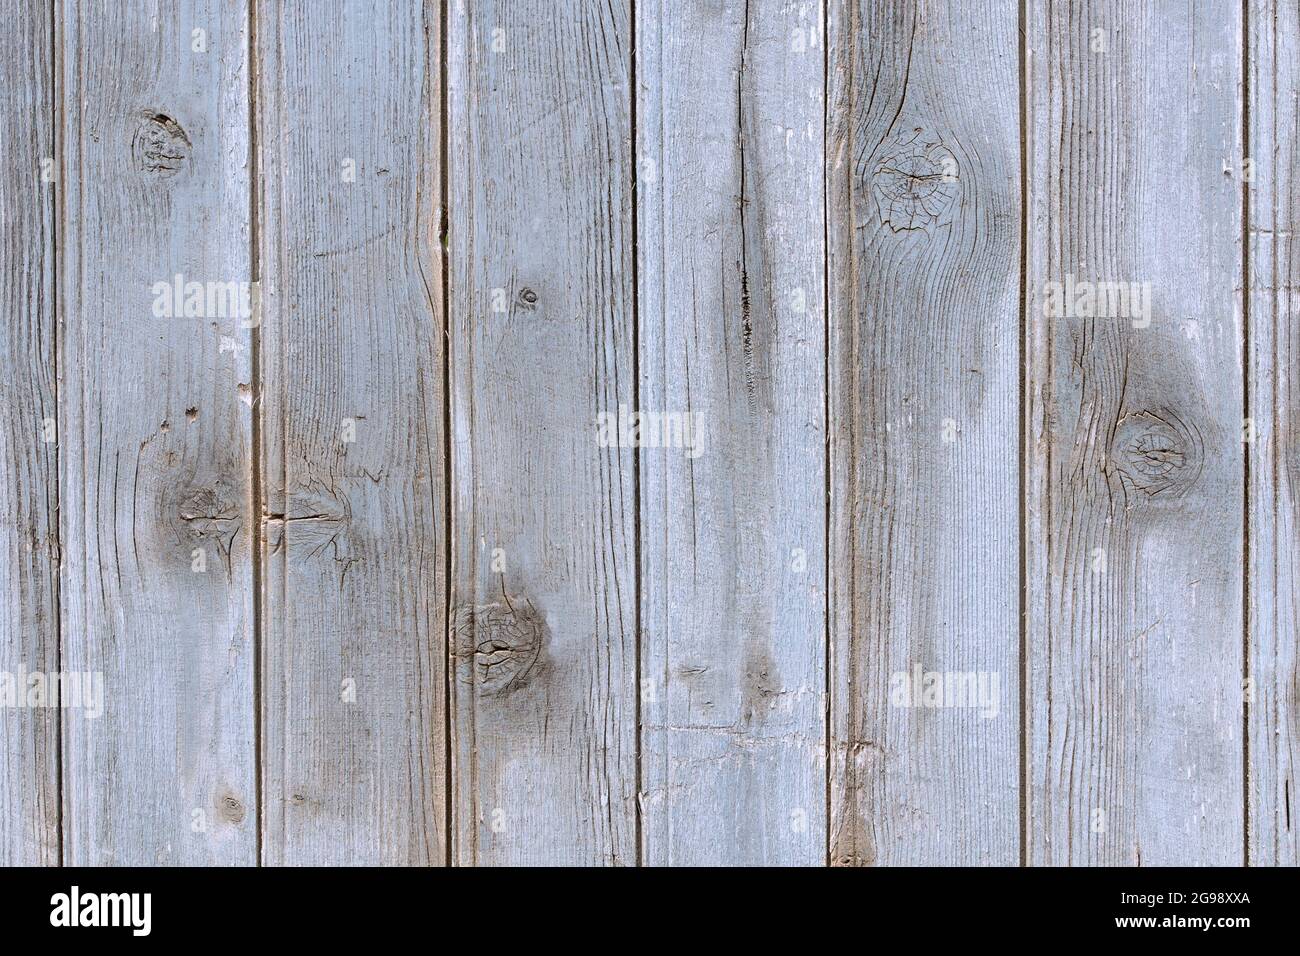 old spruce planks texture, background with knots on wood Stock Photo